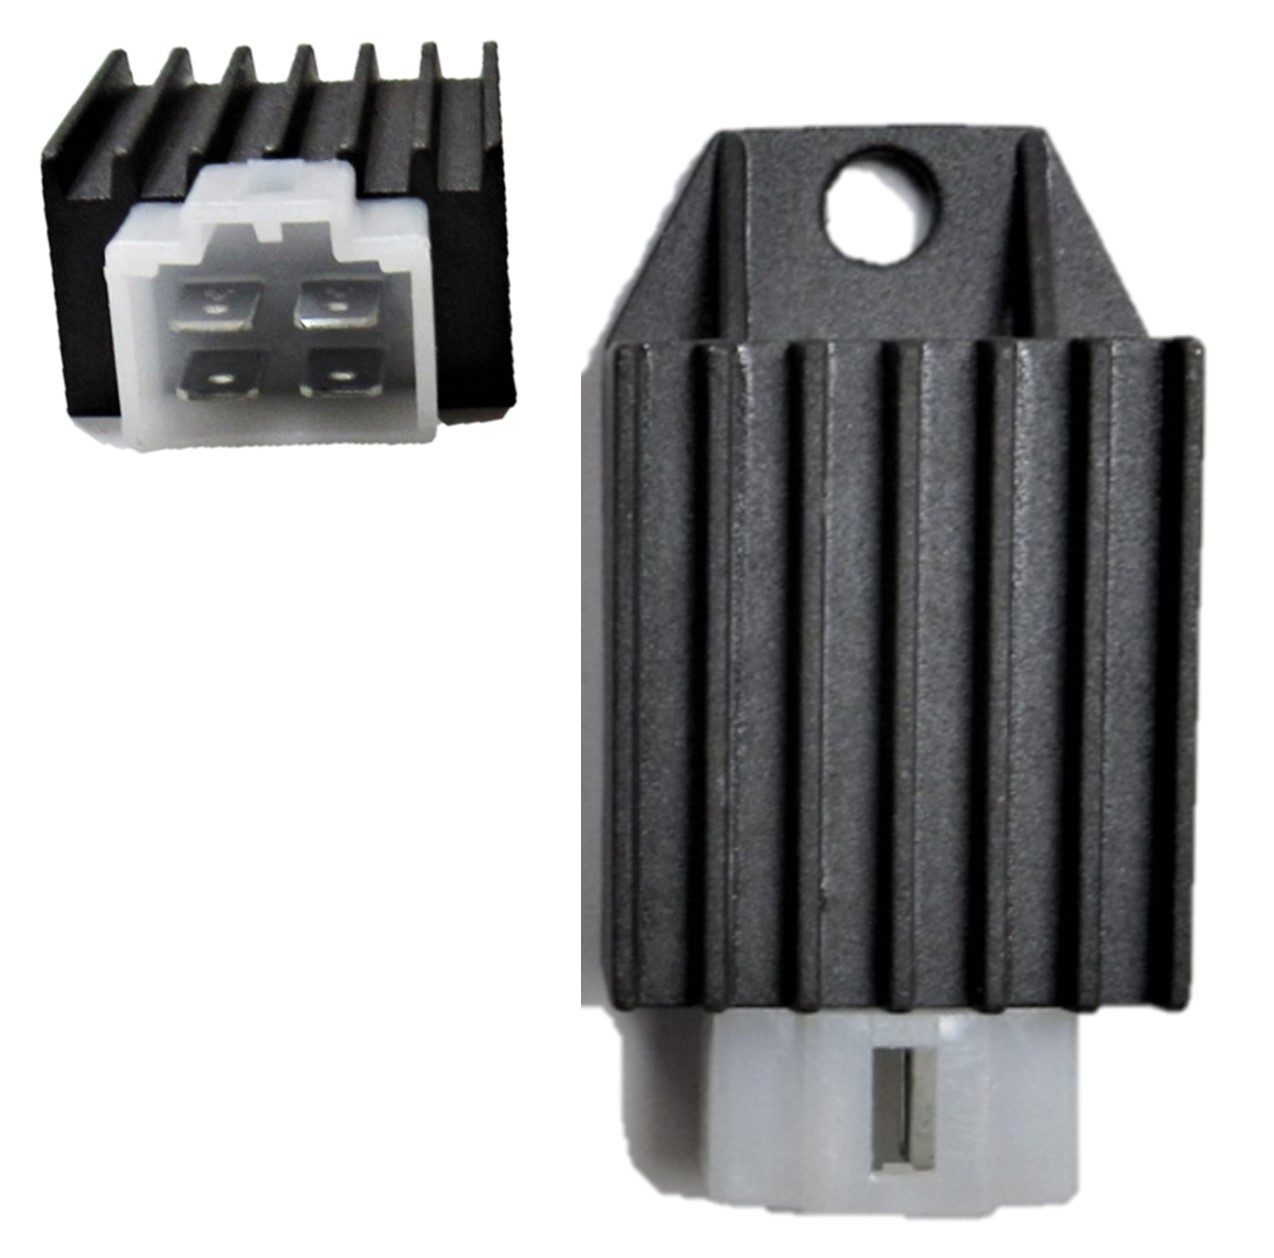 Voltage Regulator Rectifier 49-259cc ATVs, GoKarts, Scooters,Dirtbikes 4 Pins in 4 Pin Jack 54x36 - Click Image to Close